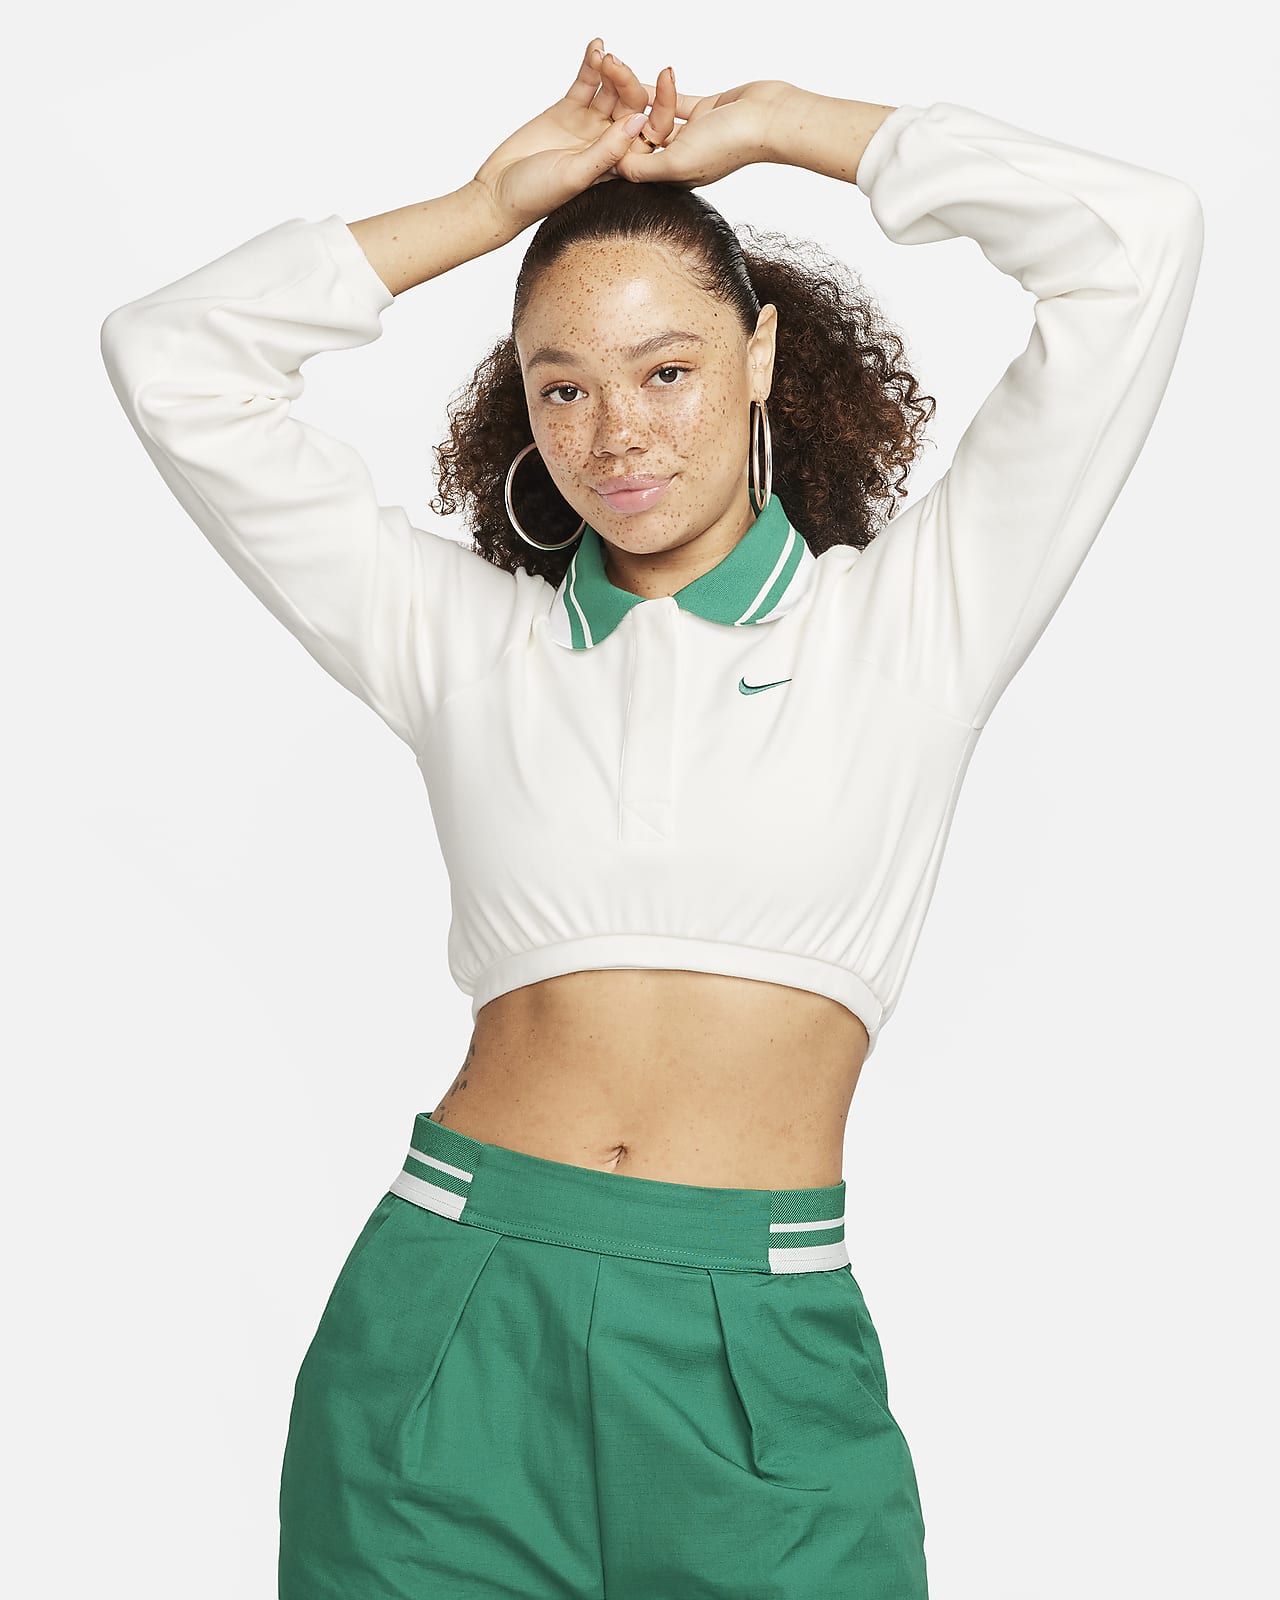 https://static.nike.com/a/images/t_PDP_1280_v1/f_auto,q_auto:eco/d48433ba-f9ee-40e6-a1c5-d16d52d8fcb1/sportswear-collection-womens-cropped-long-sleeve-polo-bz8x8p.png